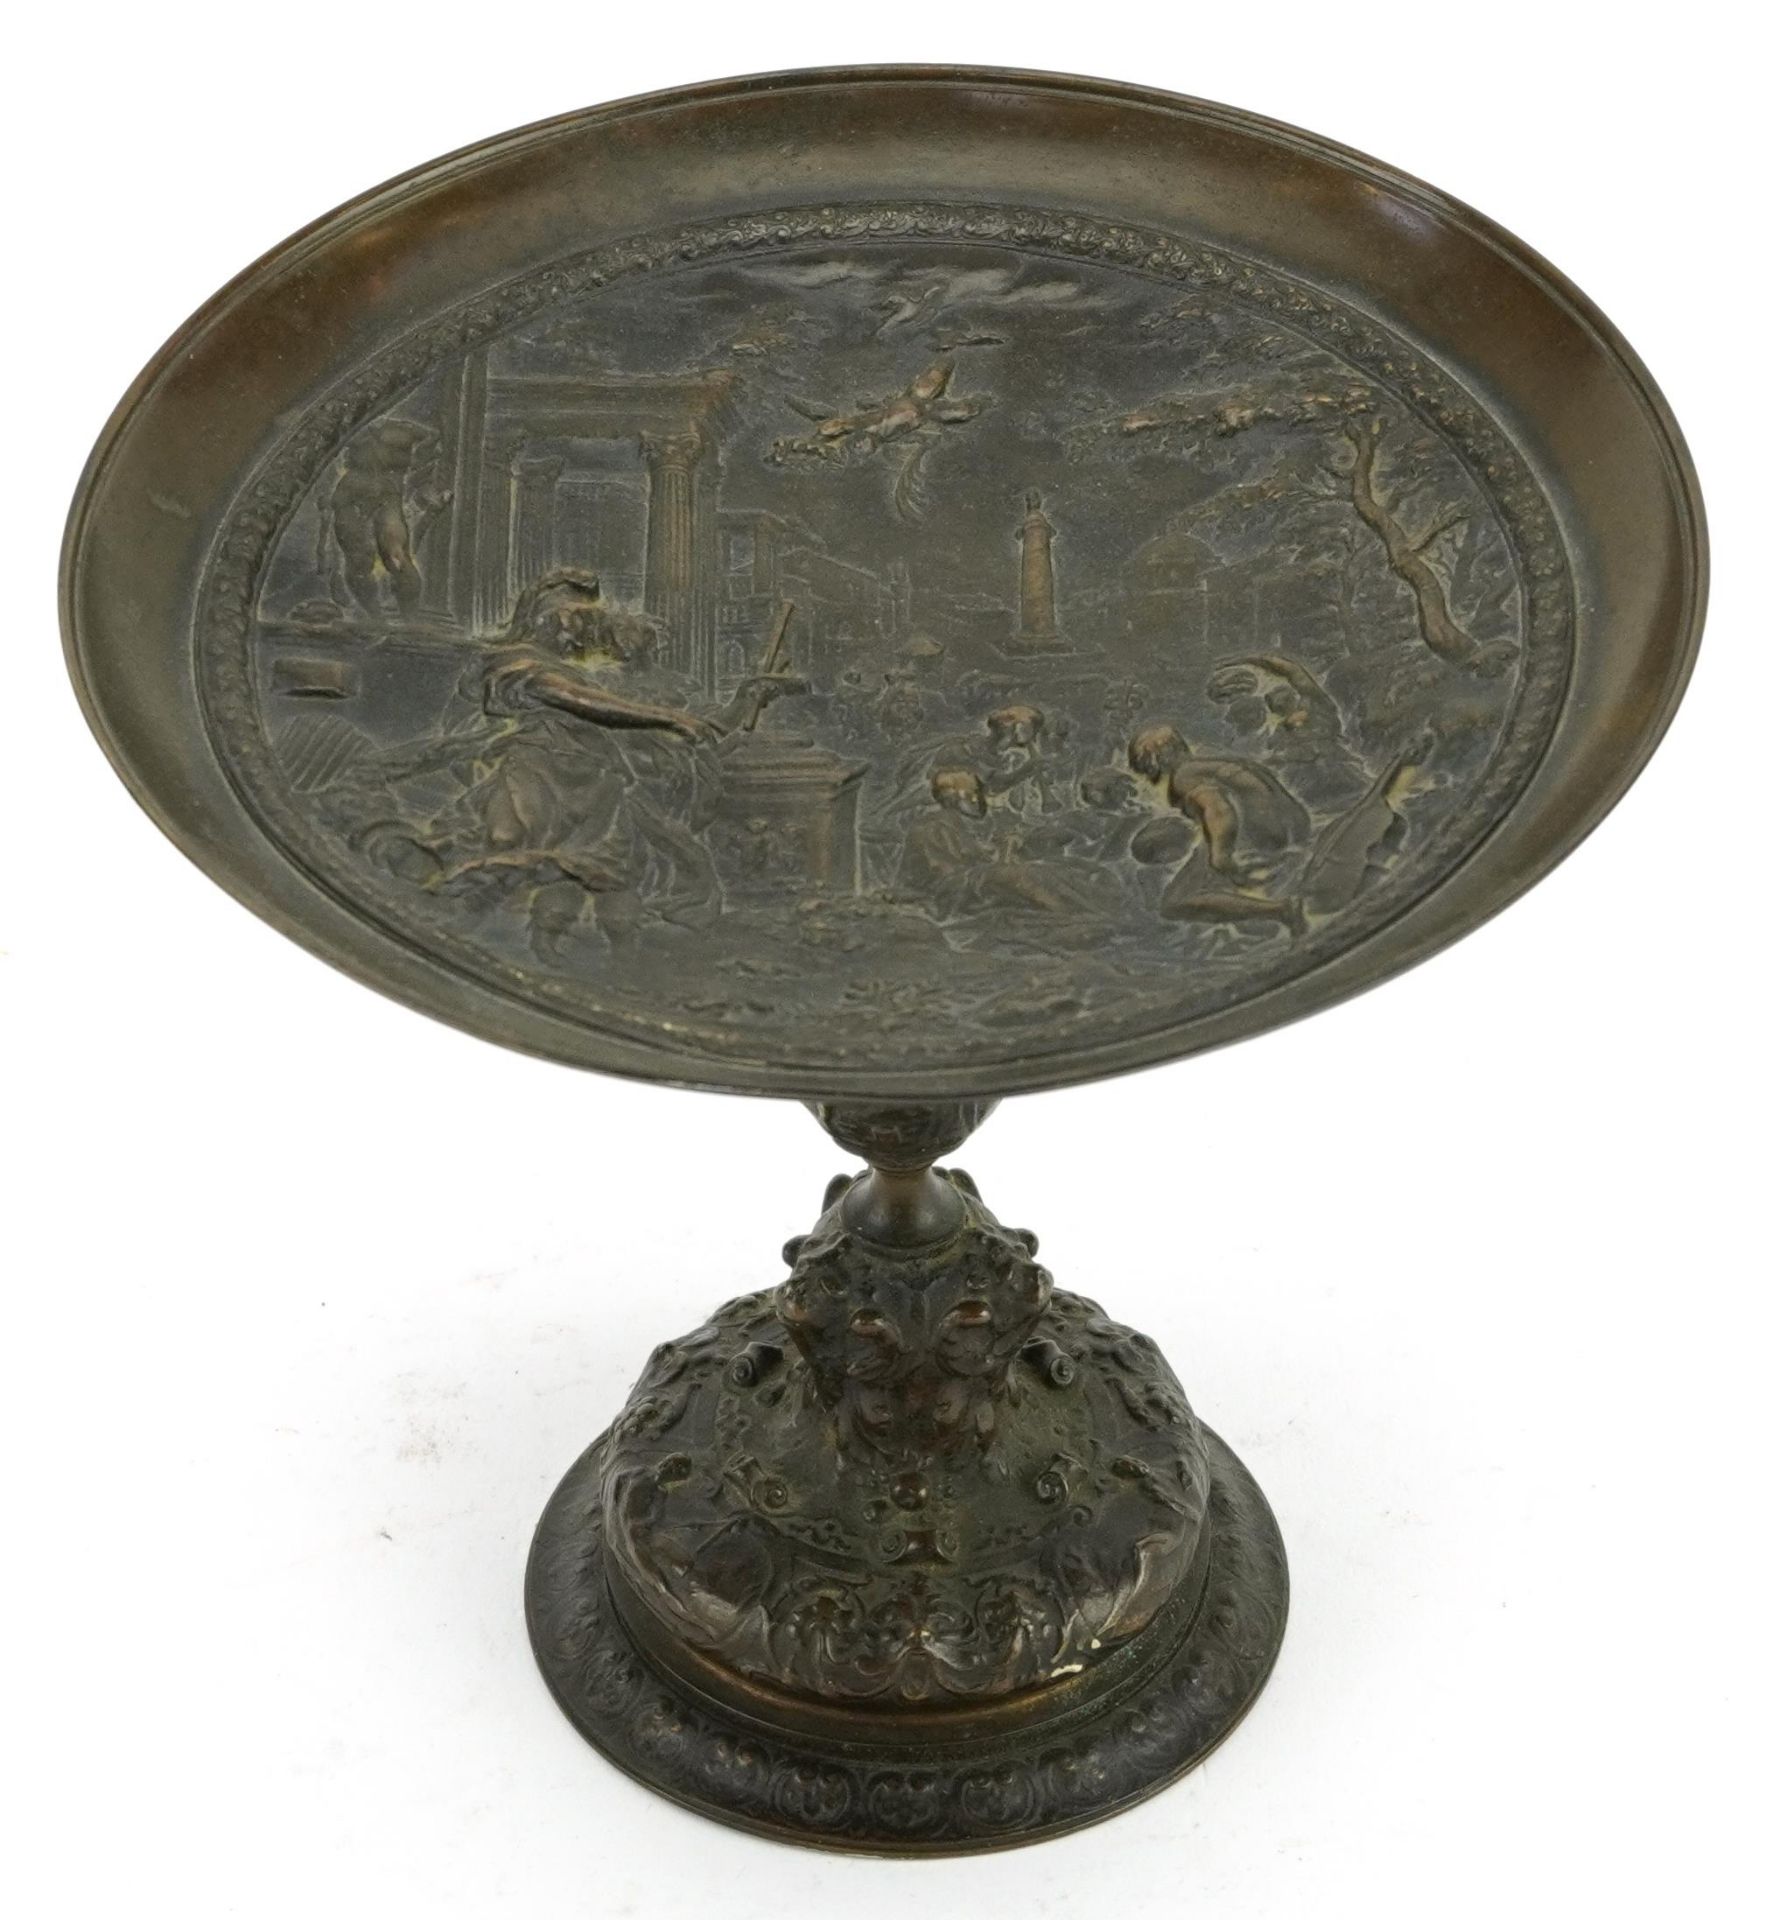 19th century Grand Tour patinated bronze comport cast in relief with classical figures and Putti, - Image 2 of 4